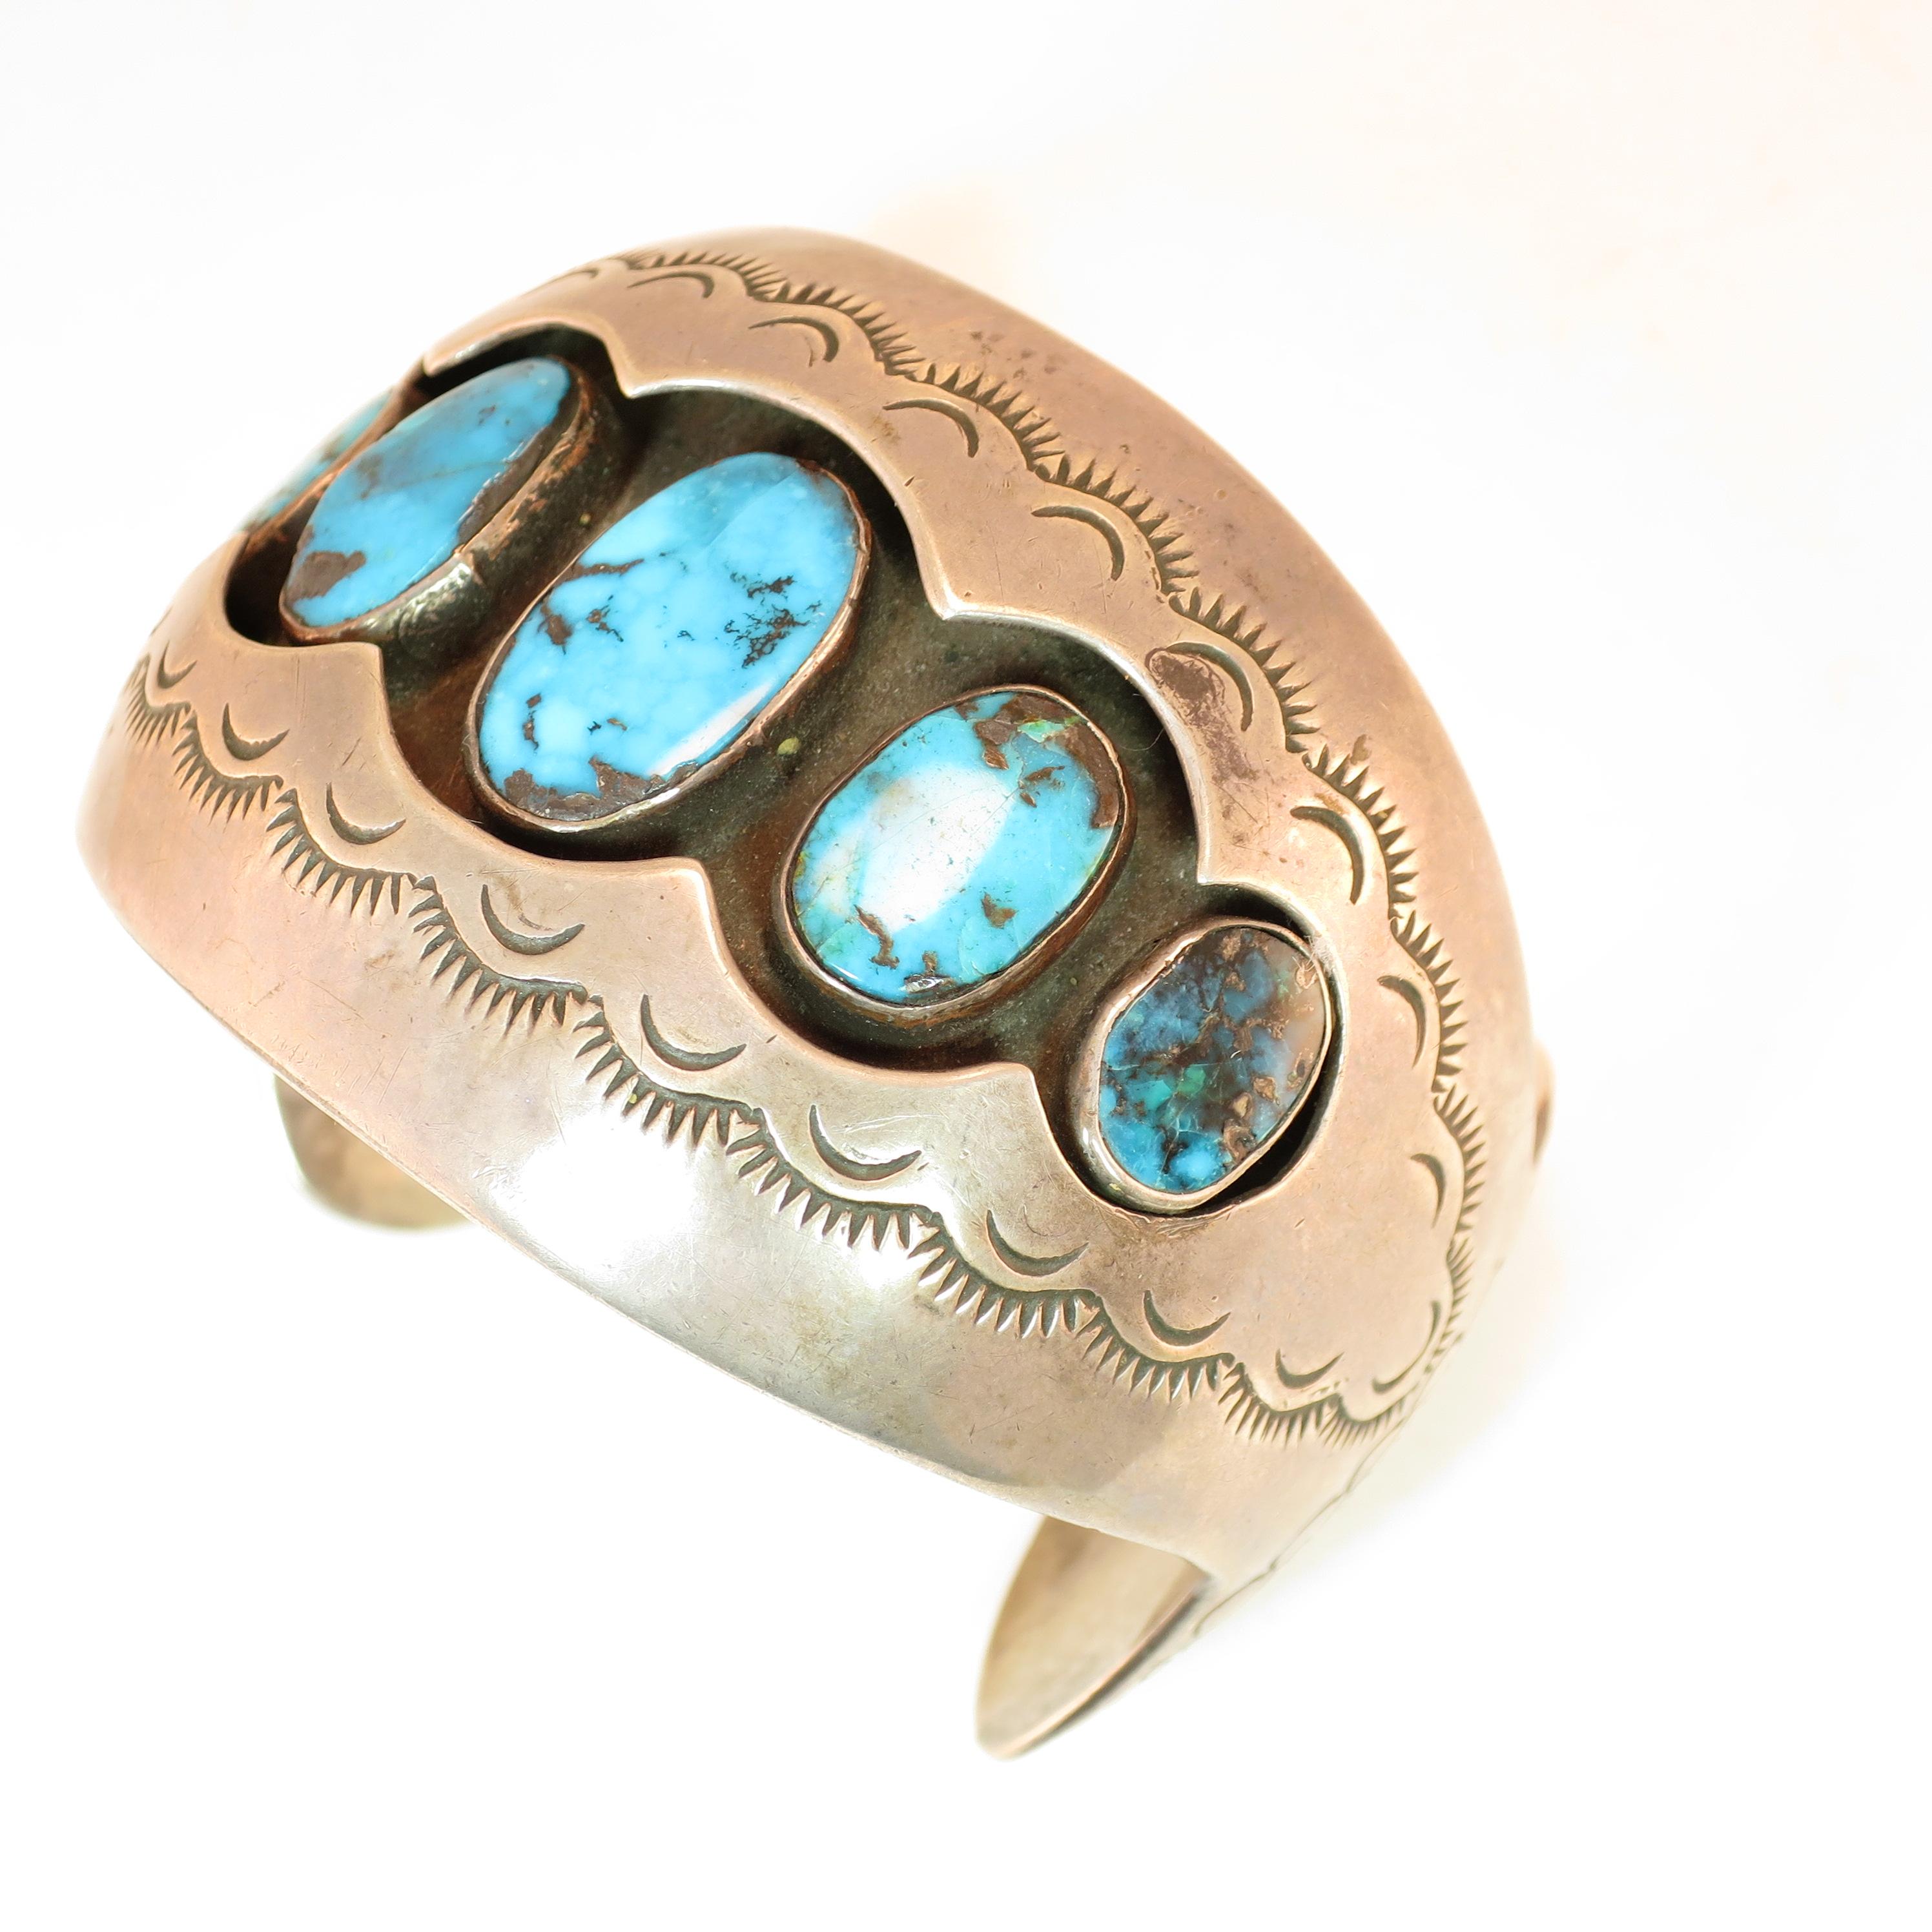 Offered here is a Native American Zuni sterling silver and turquoise cuff bracelet crafted by Mabel Watson in the 1970s. This oversize cuff offers a deep shadowbox design presenting five graduated bezel-set oval turquoise stones with black and